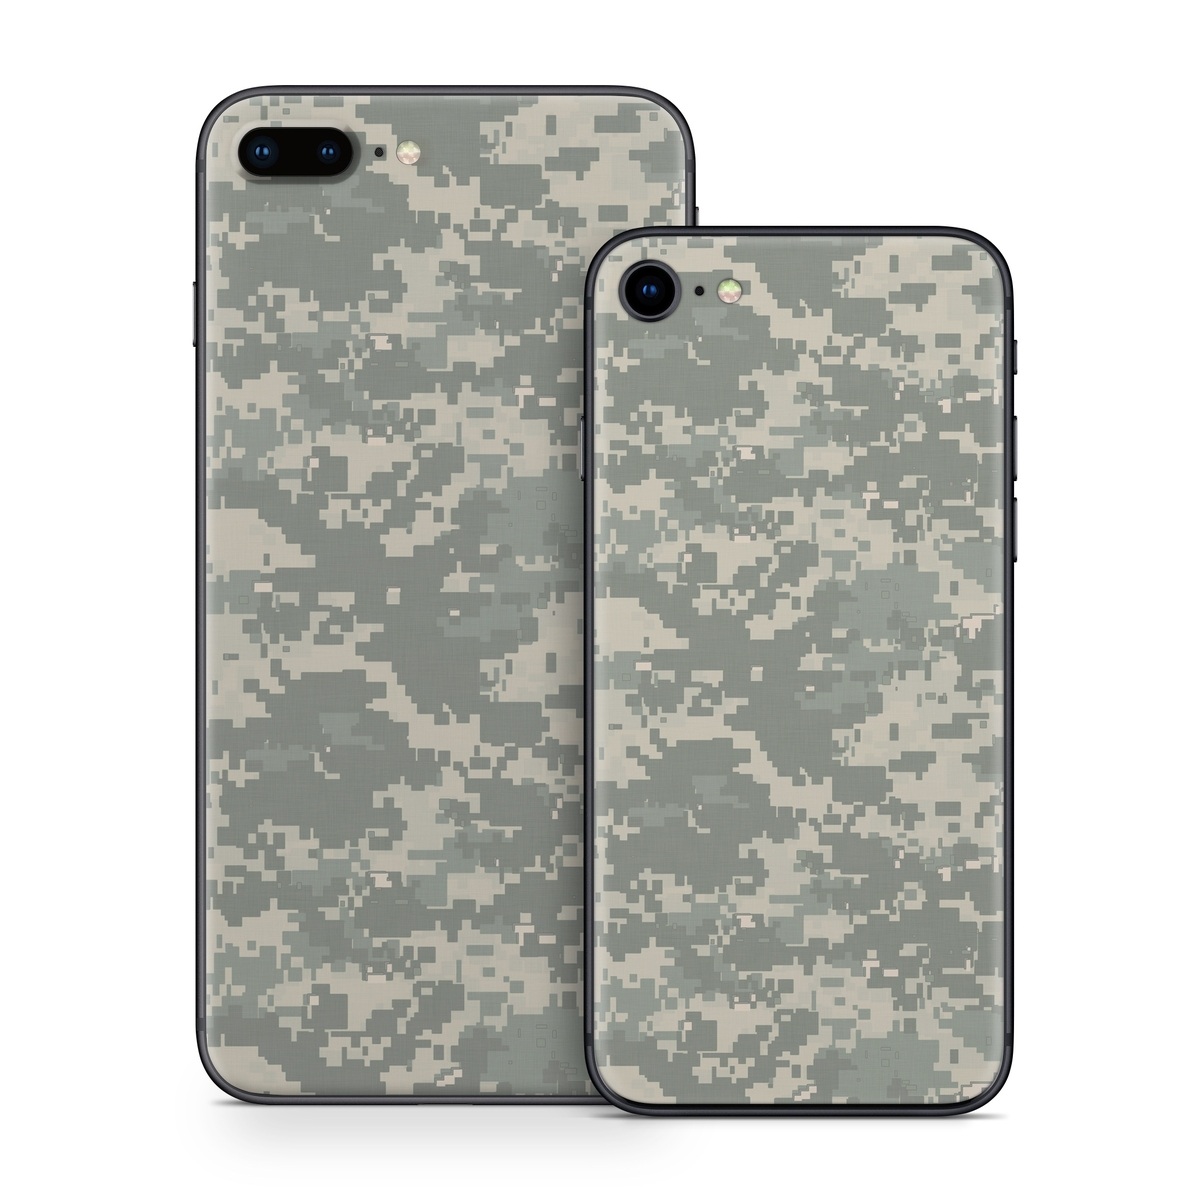 iPhone 8 Series Skin design of Military camouflage, Green, Pattern, Uniform, Camouflage, Design, Wallpaper, with gray, green colors